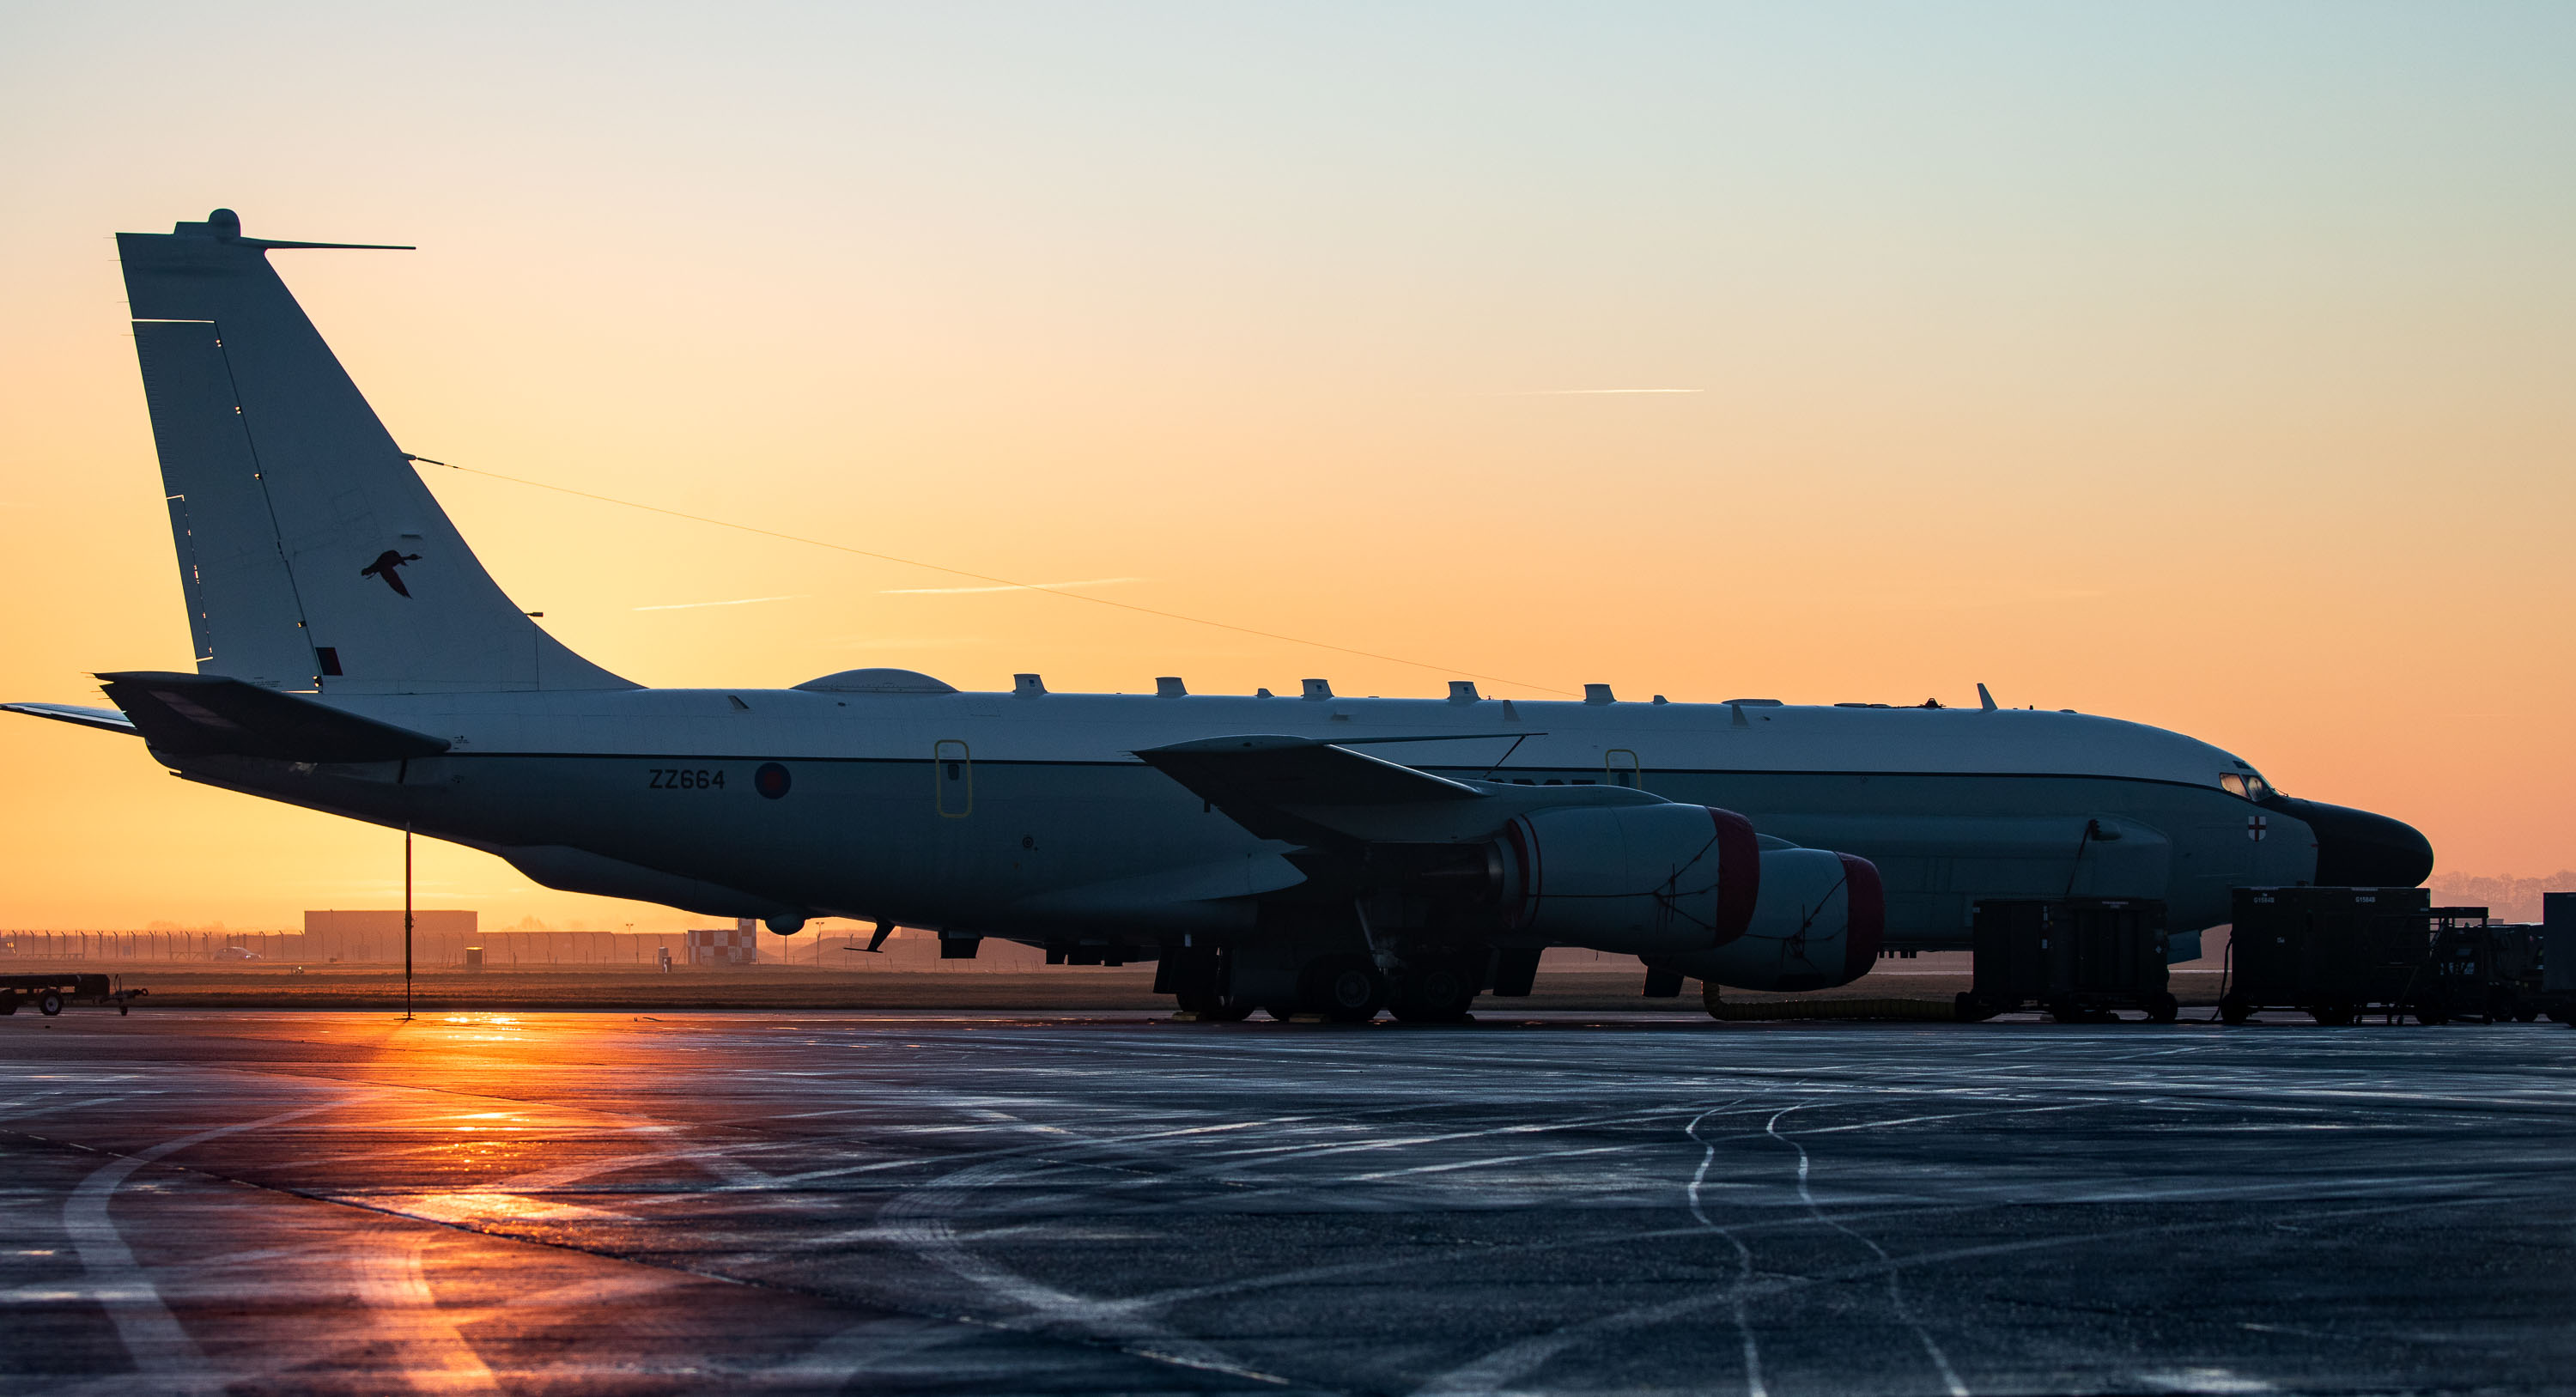 RC-135W Rivet Joint on the airfield during sunset.